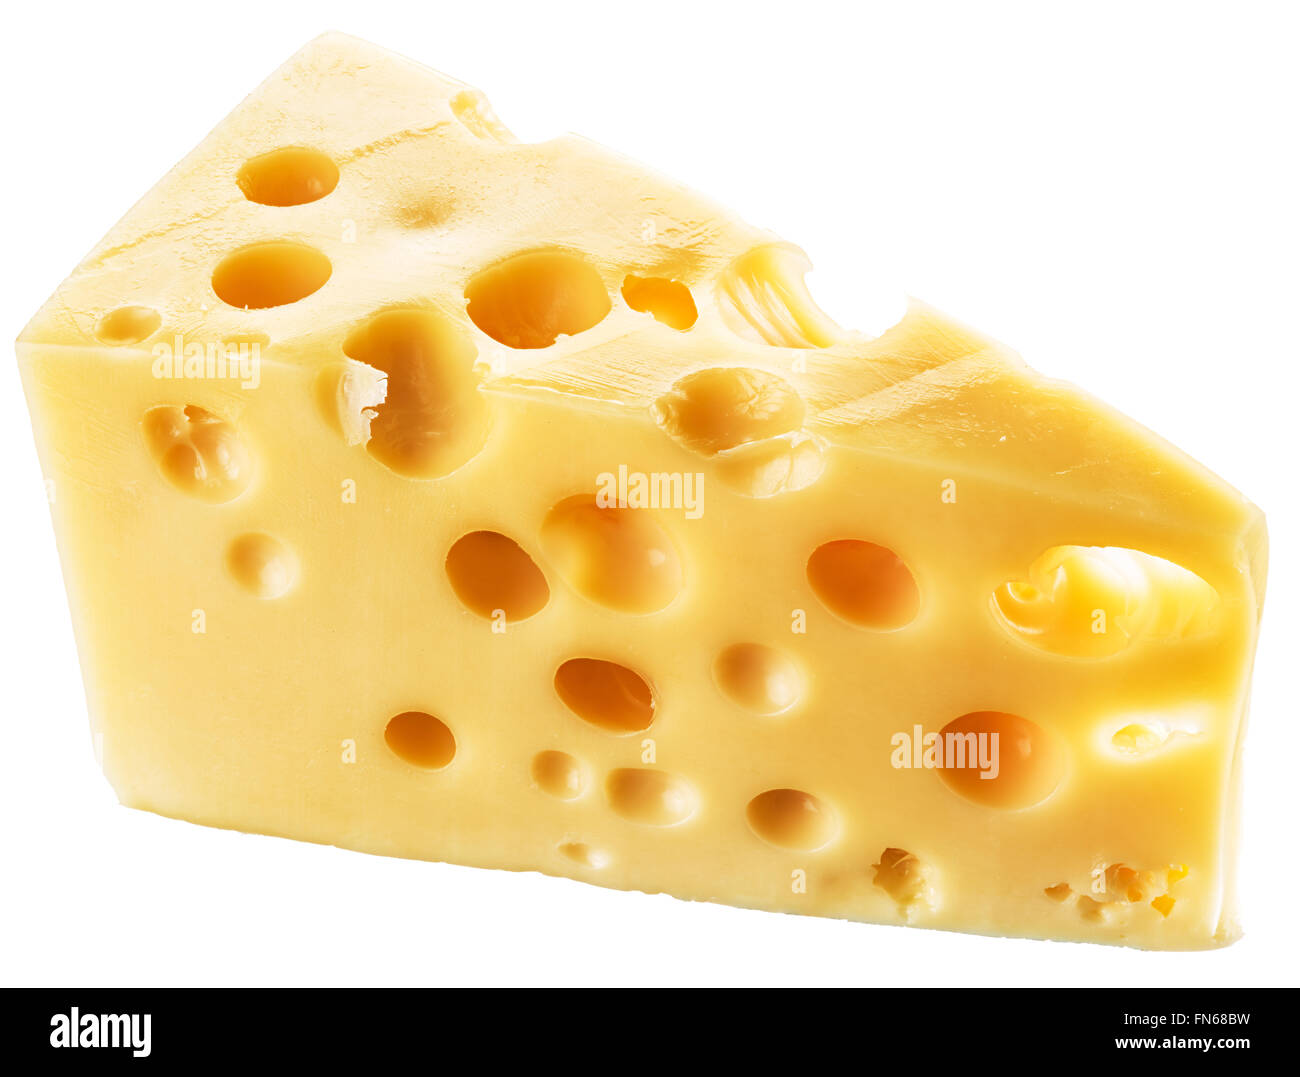 Piece of Swiss cheese. File contains clipping paths. Stock Photo